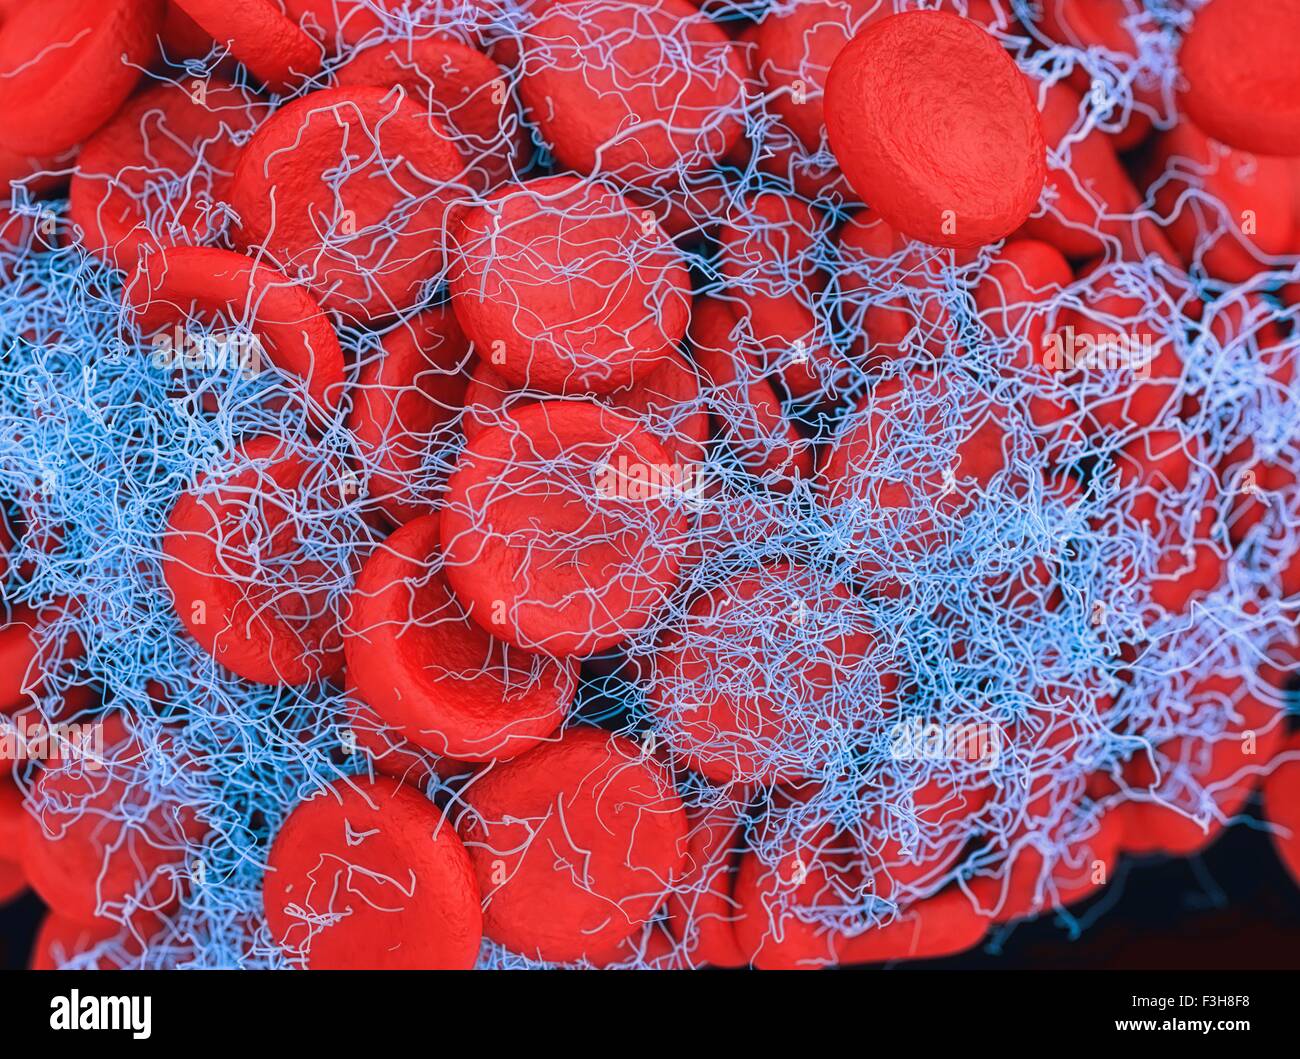 Illustration of a blood clot showing a clump of red blood cells intertwined in a fibrin mesh Stock Photo